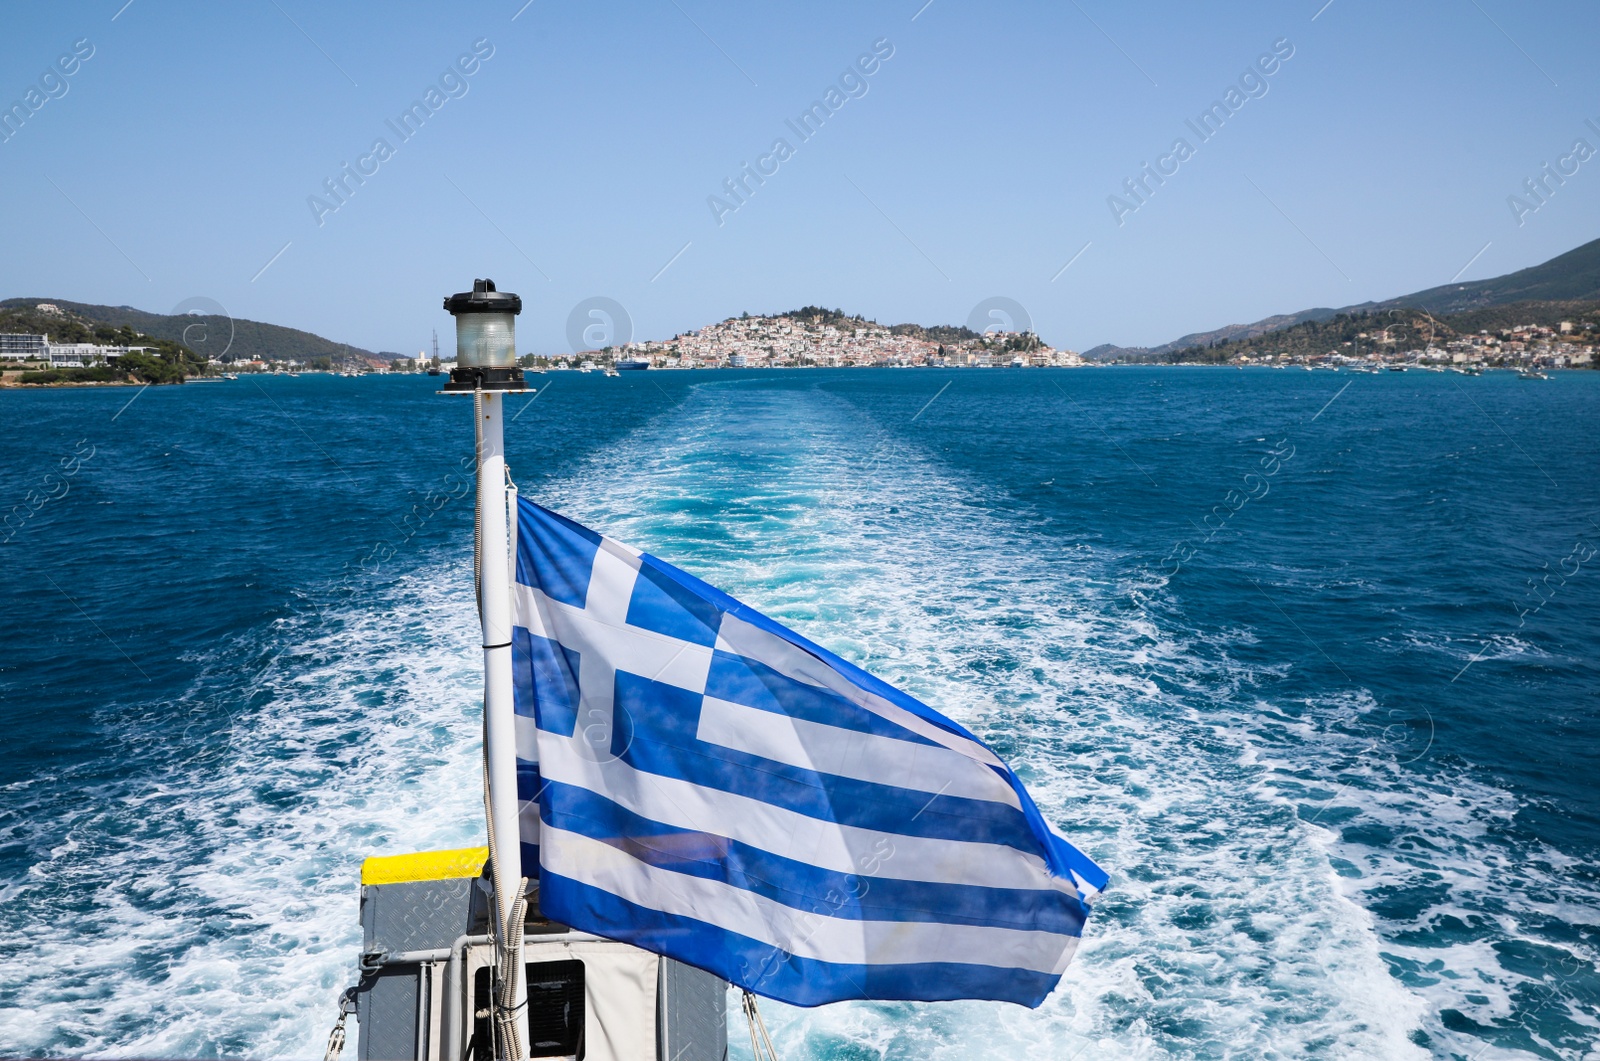 Photo of POROS, GREECE - MAY 28, 2022: Beautiful boat with flag of Greece in sea on sunny day